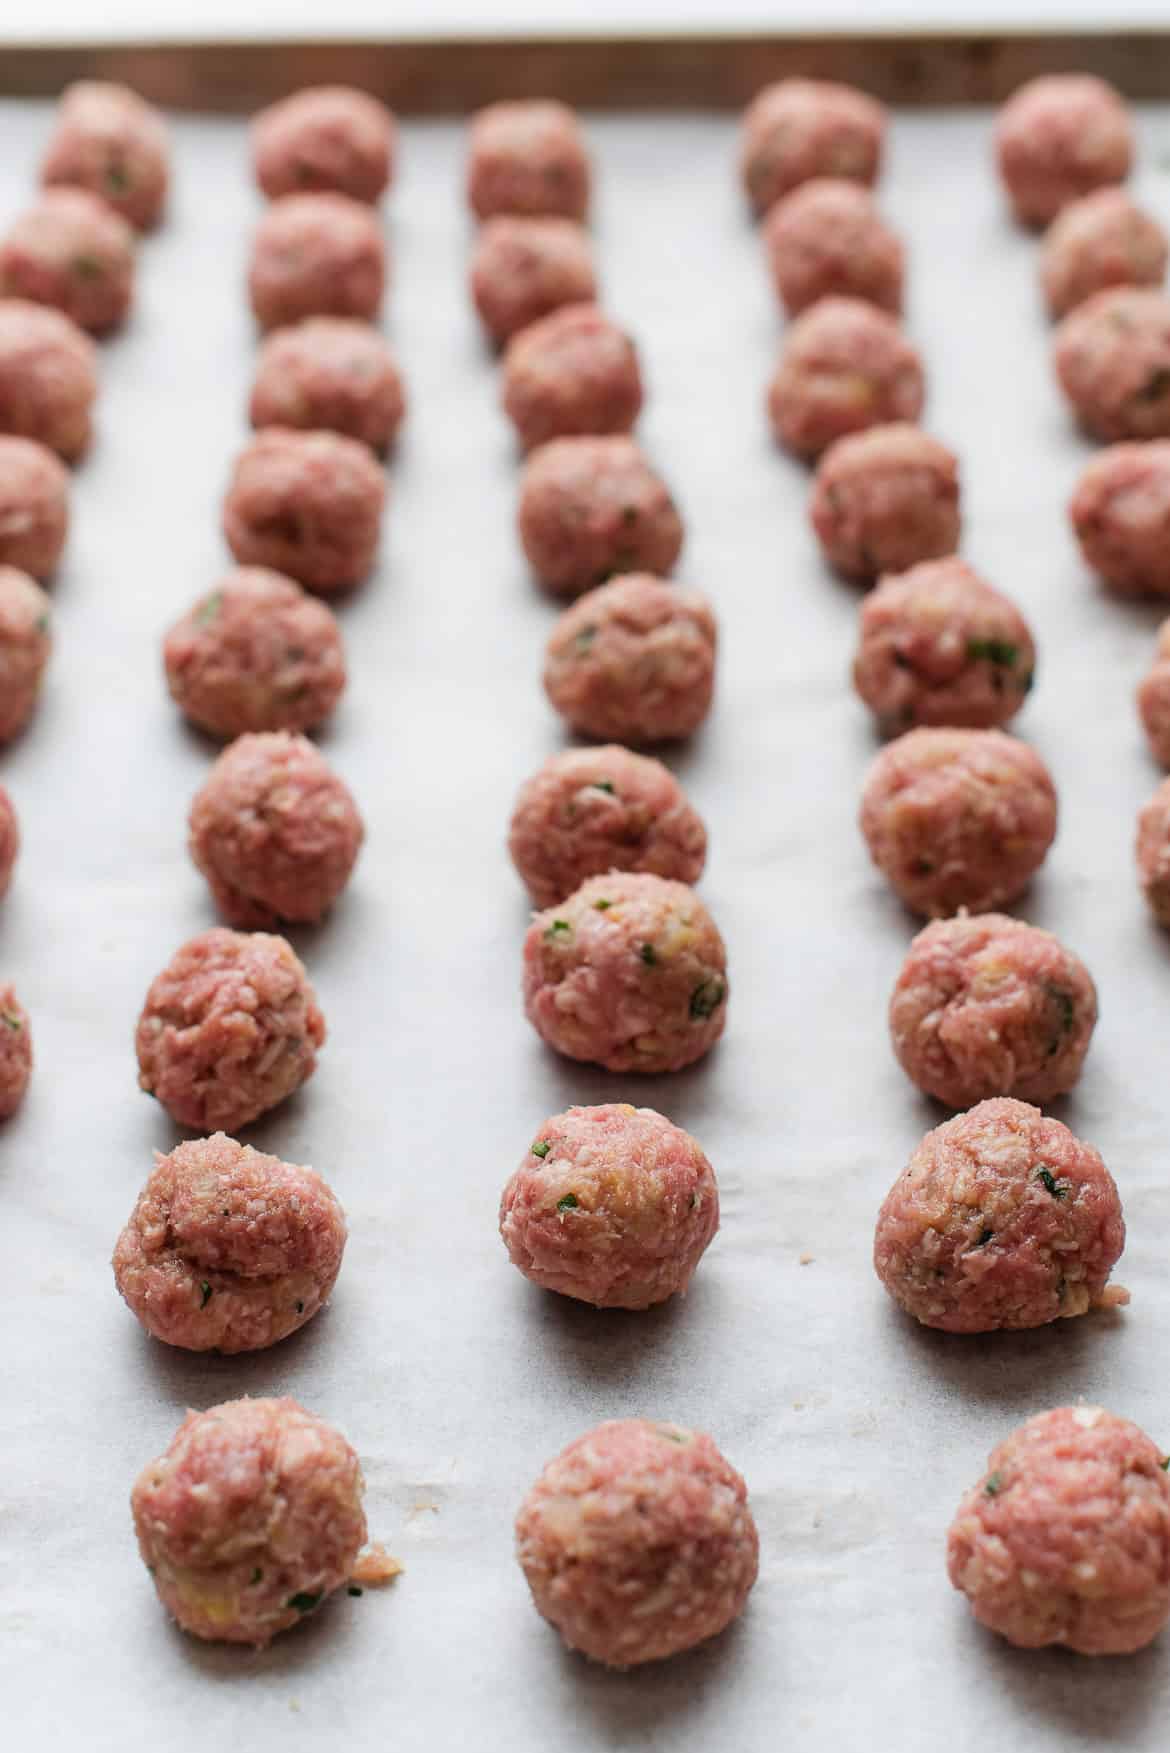 Small homemade meatballs ready to cook on a lined baking tray.